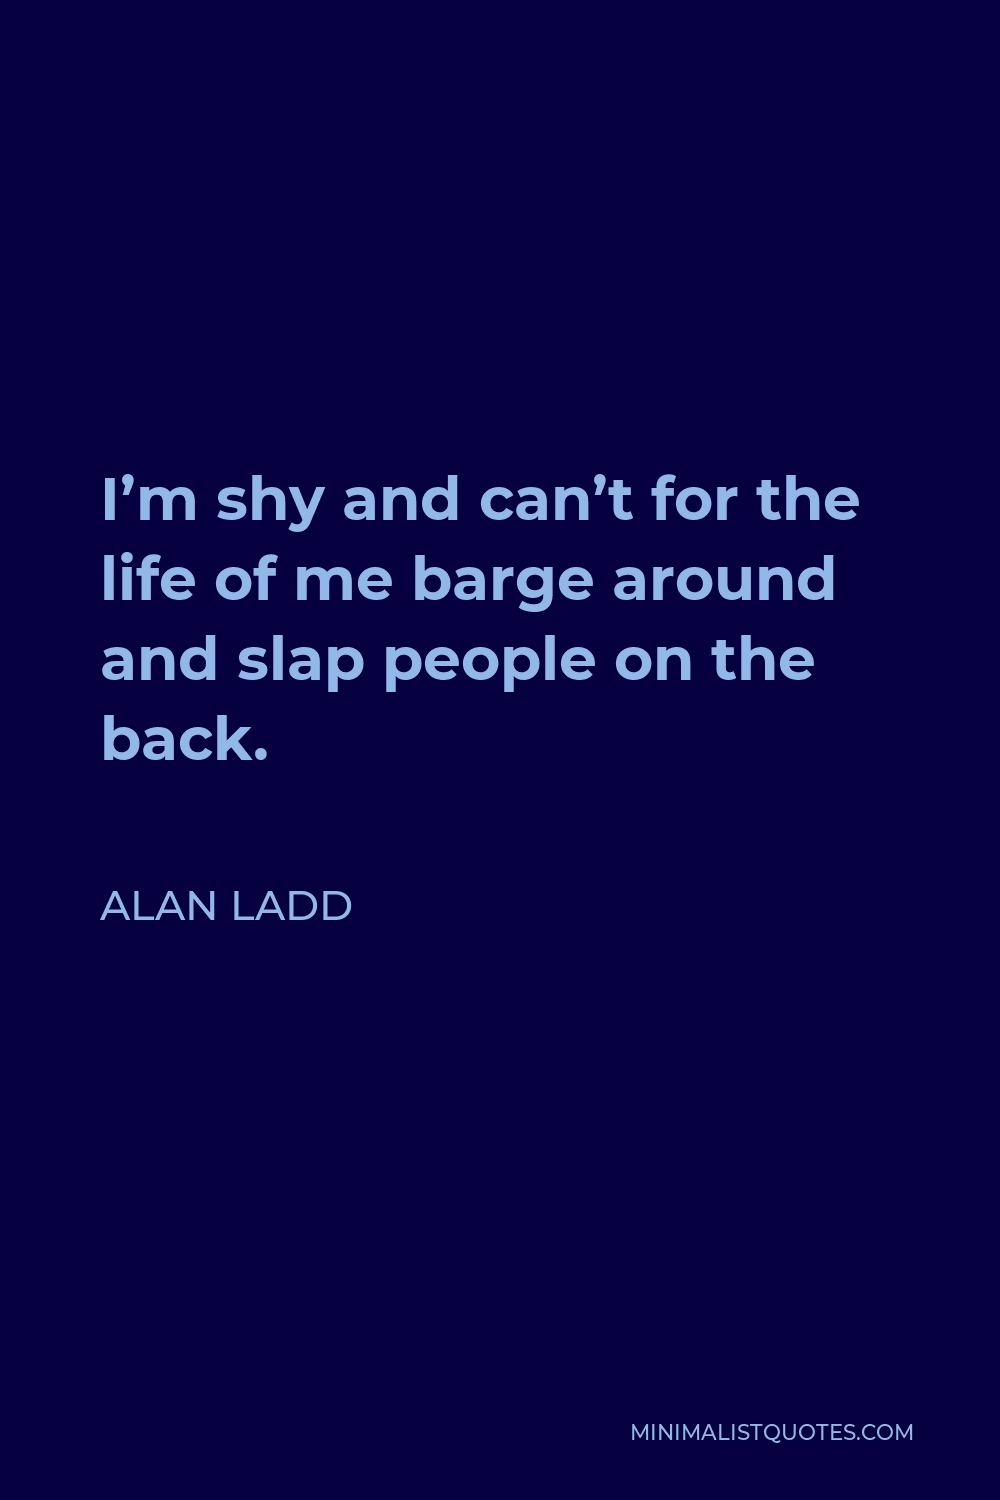 Alan Ladd Quote - I’m shy and can’t for the life of me barge around and slap people on the back.